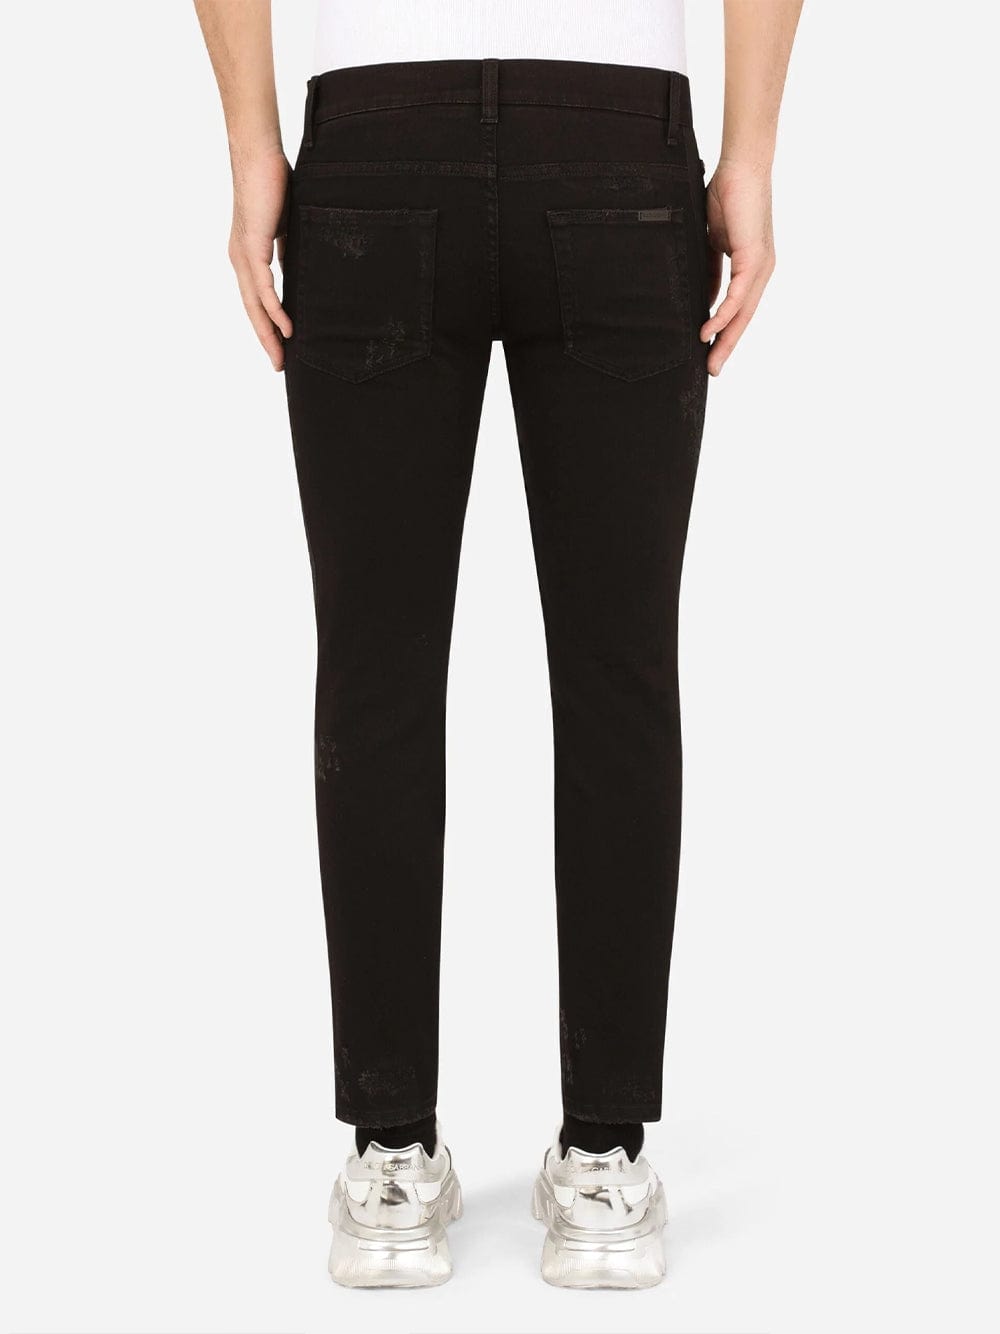 Dolce & Gabbana Embroidered Skinny Jeans